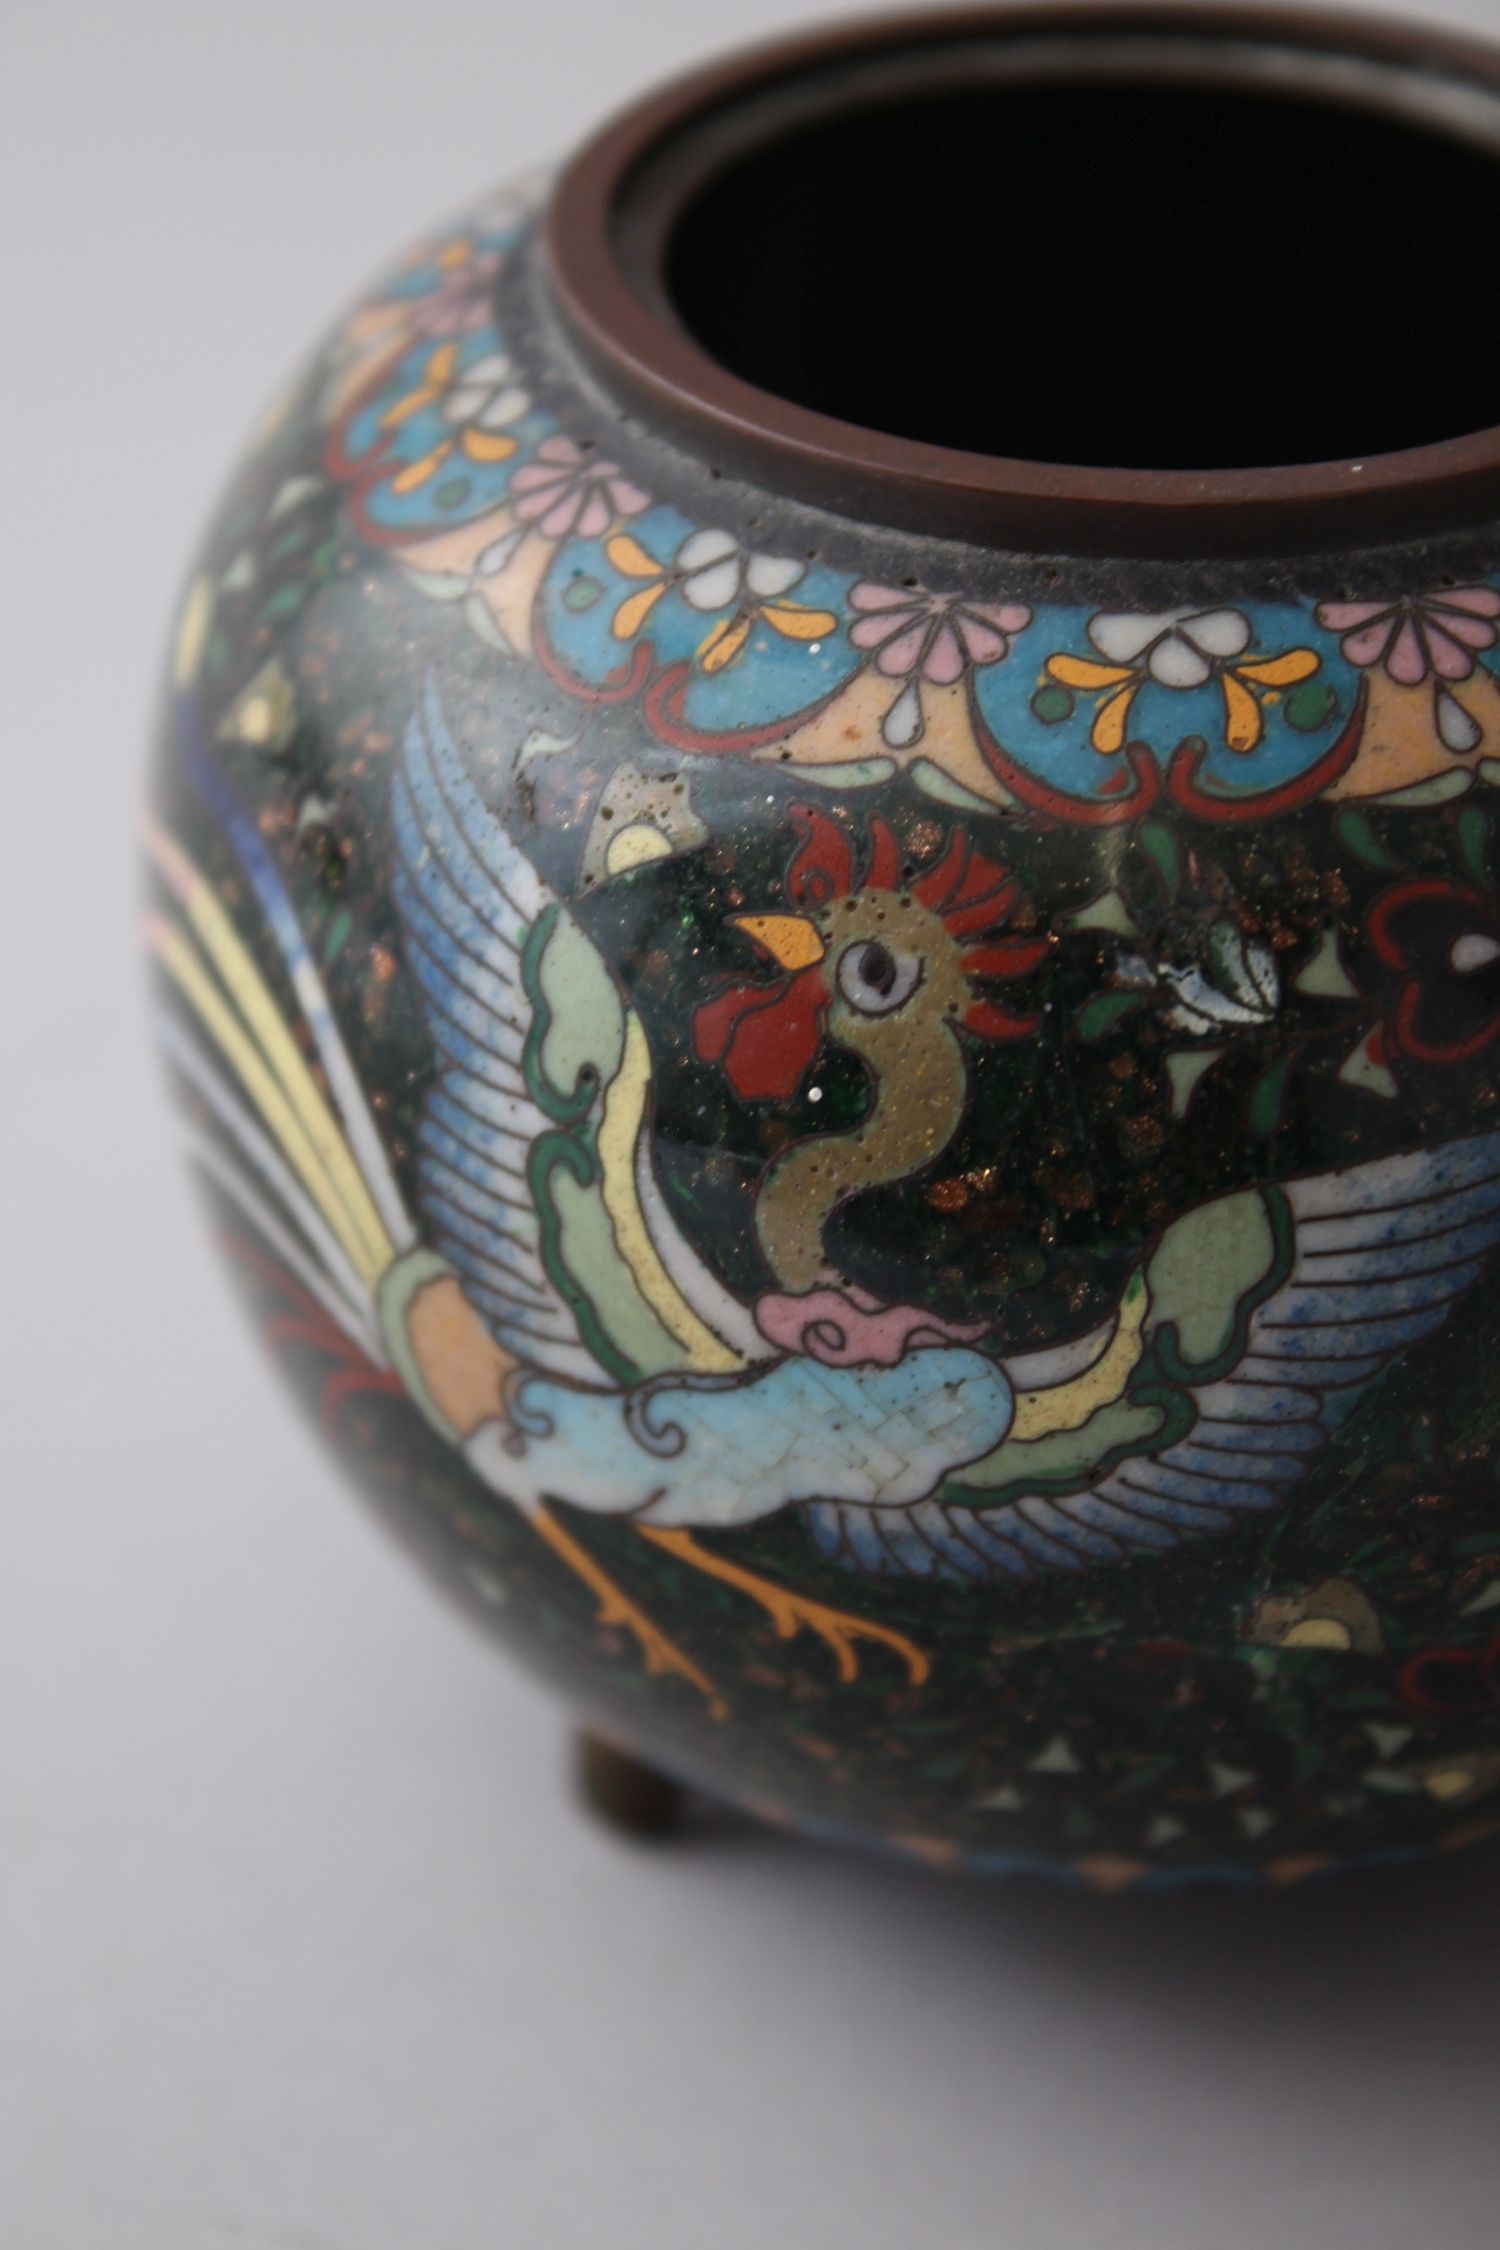 A JAPANESE MEIJI PERIOD CLOISONNE KORO, decorated with a gold dust ground surrounded with floral - Image 4 of 5